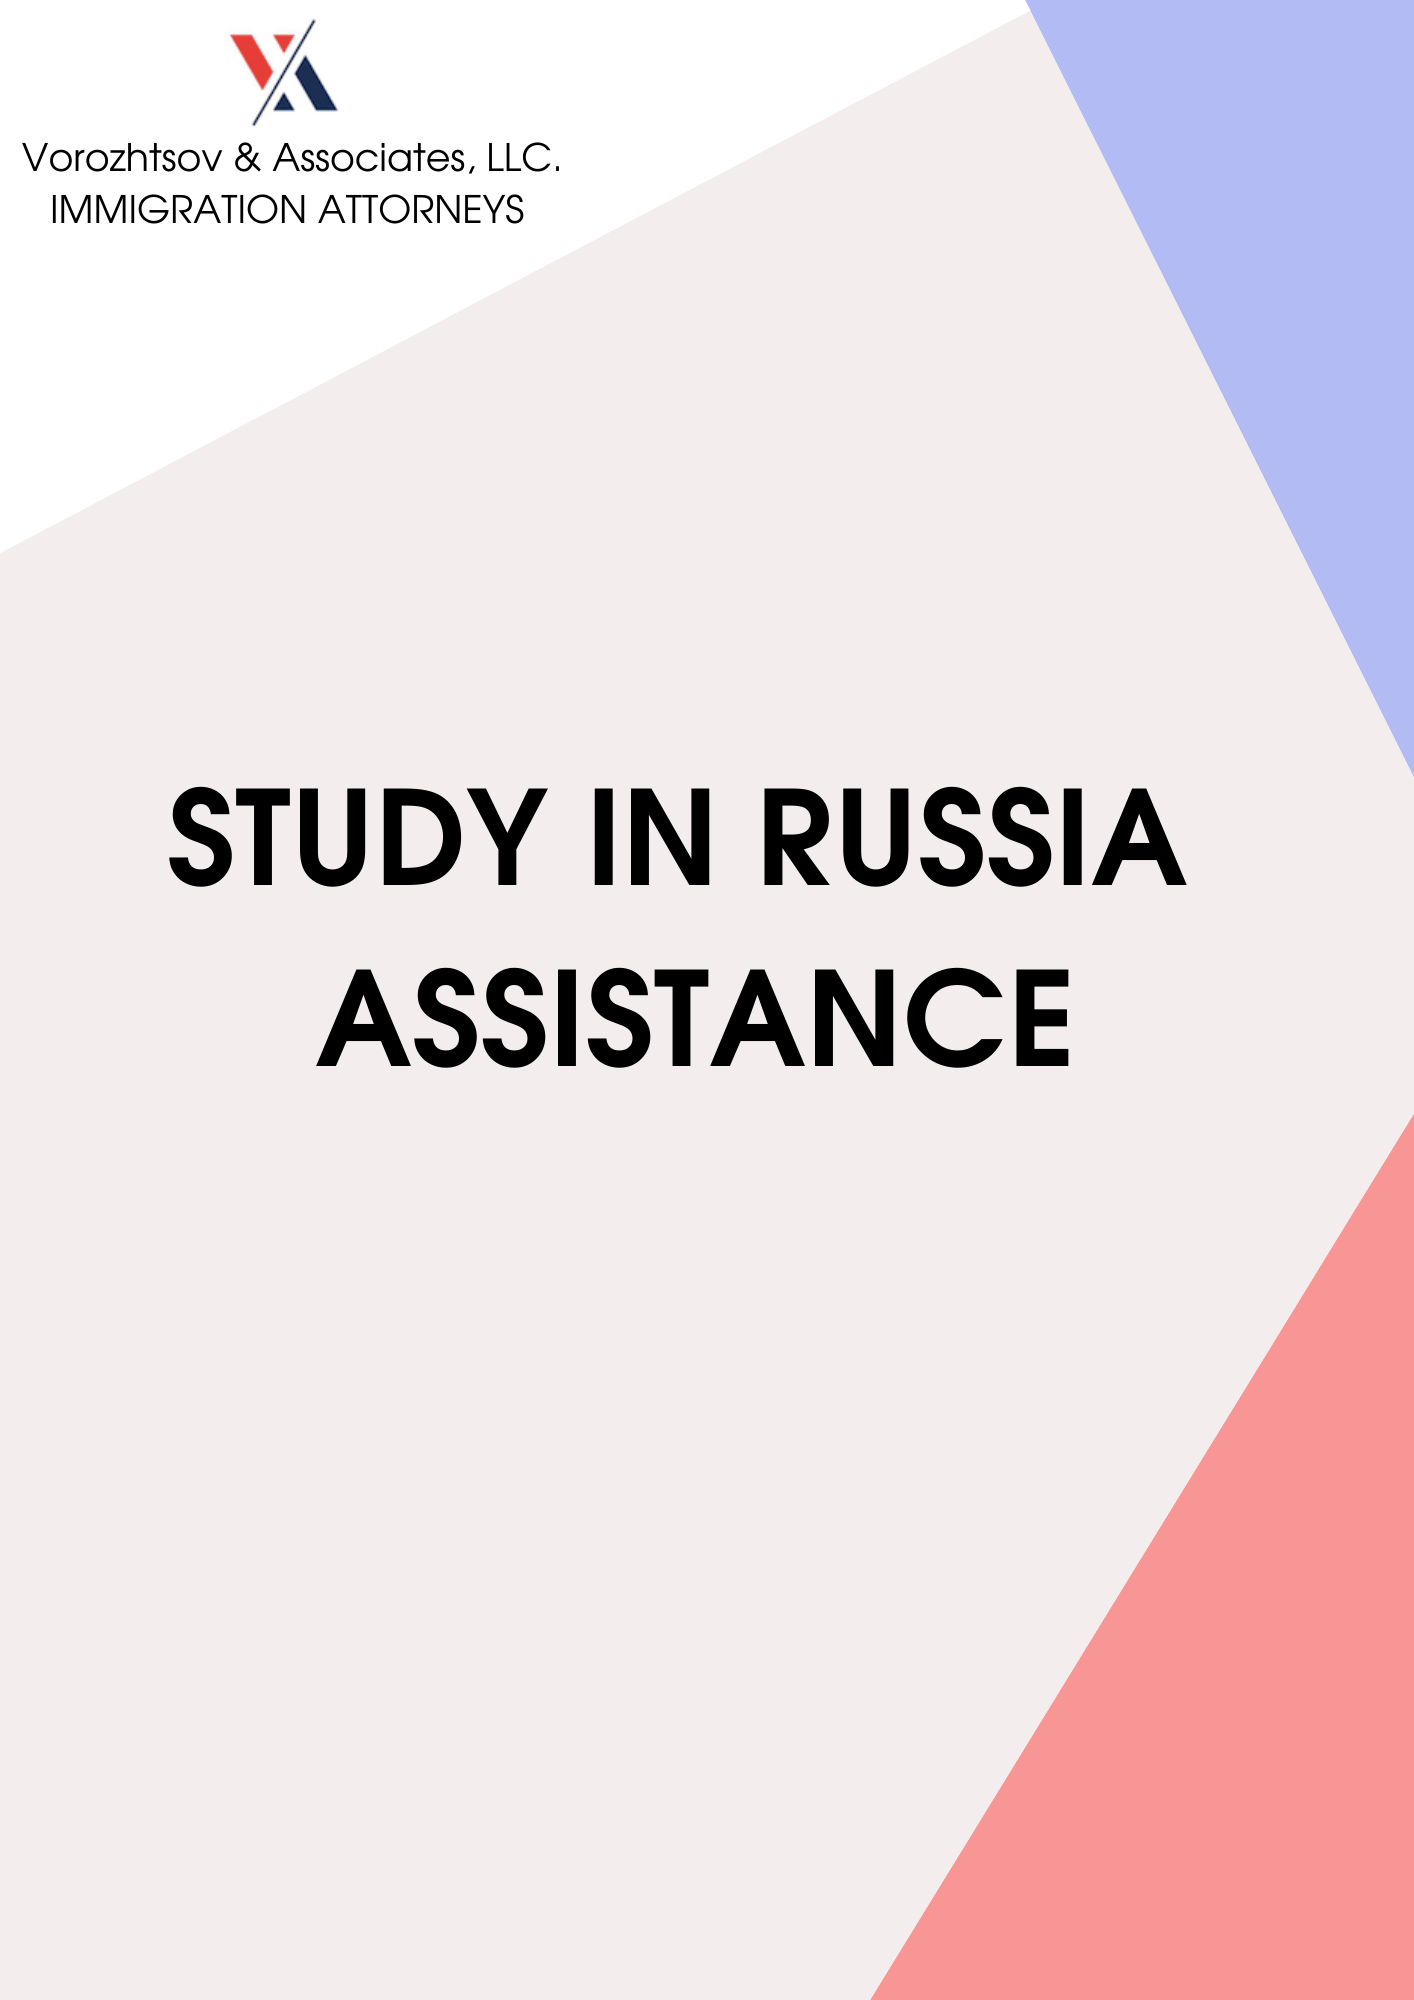 Study in Russia assistance package 010